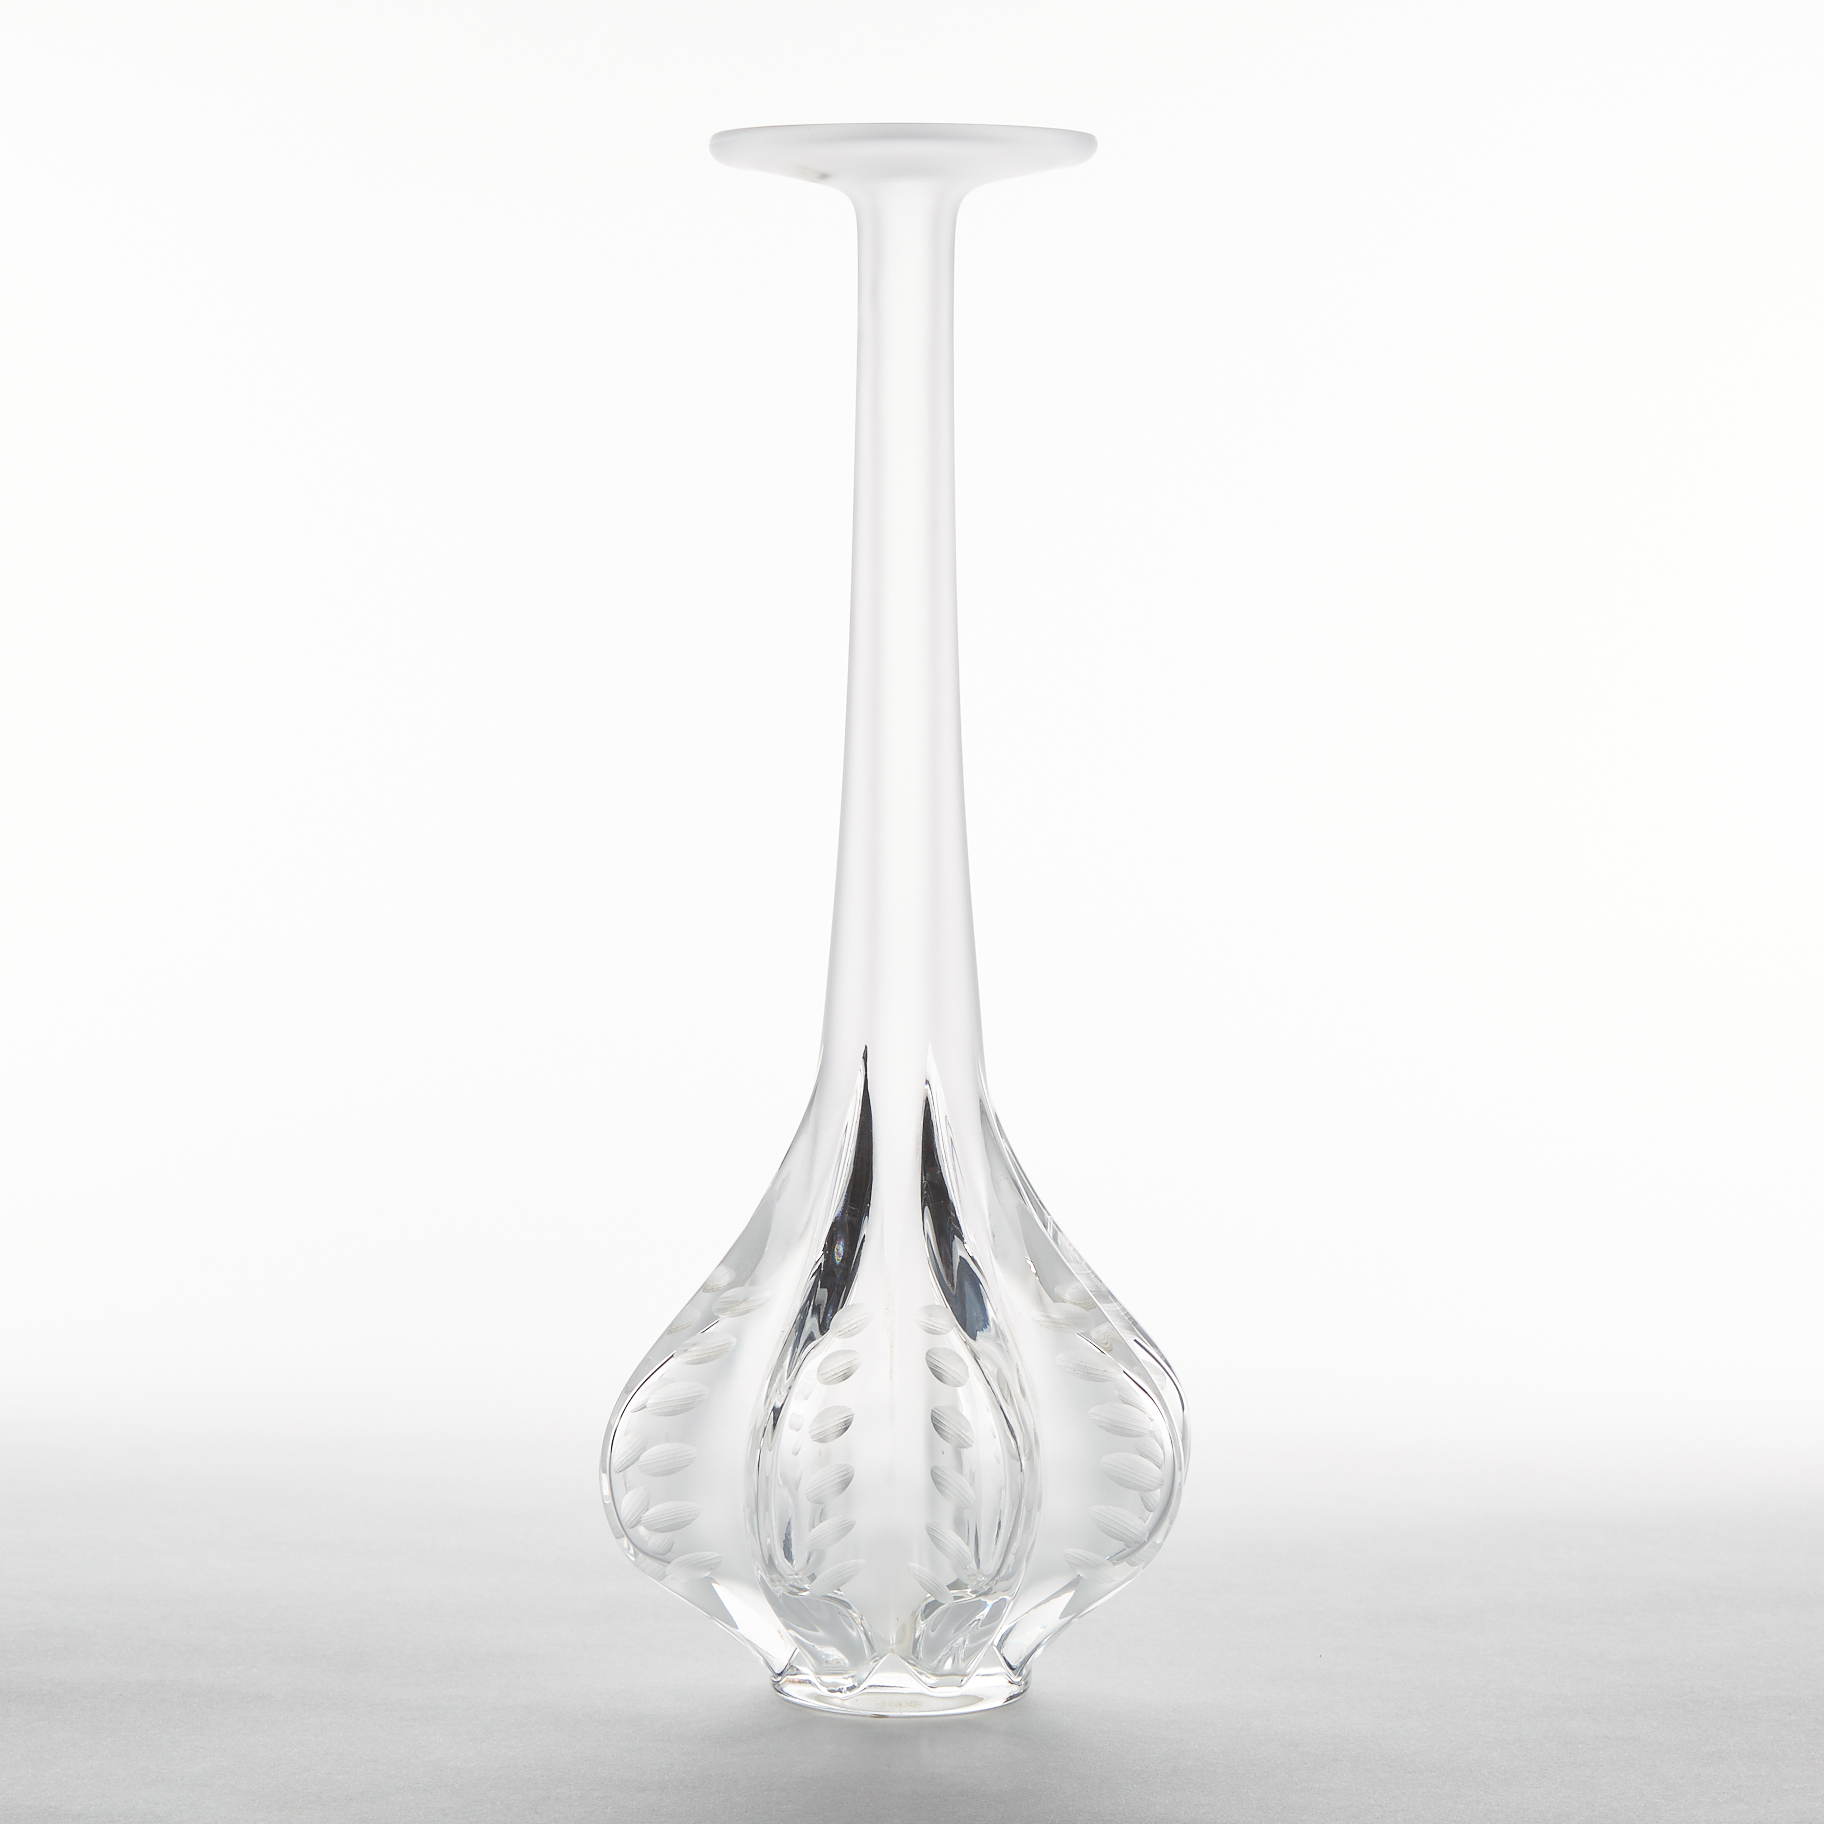 'Claude', Lalique Moulded and Partly Frosted Glass Vase, post-1978